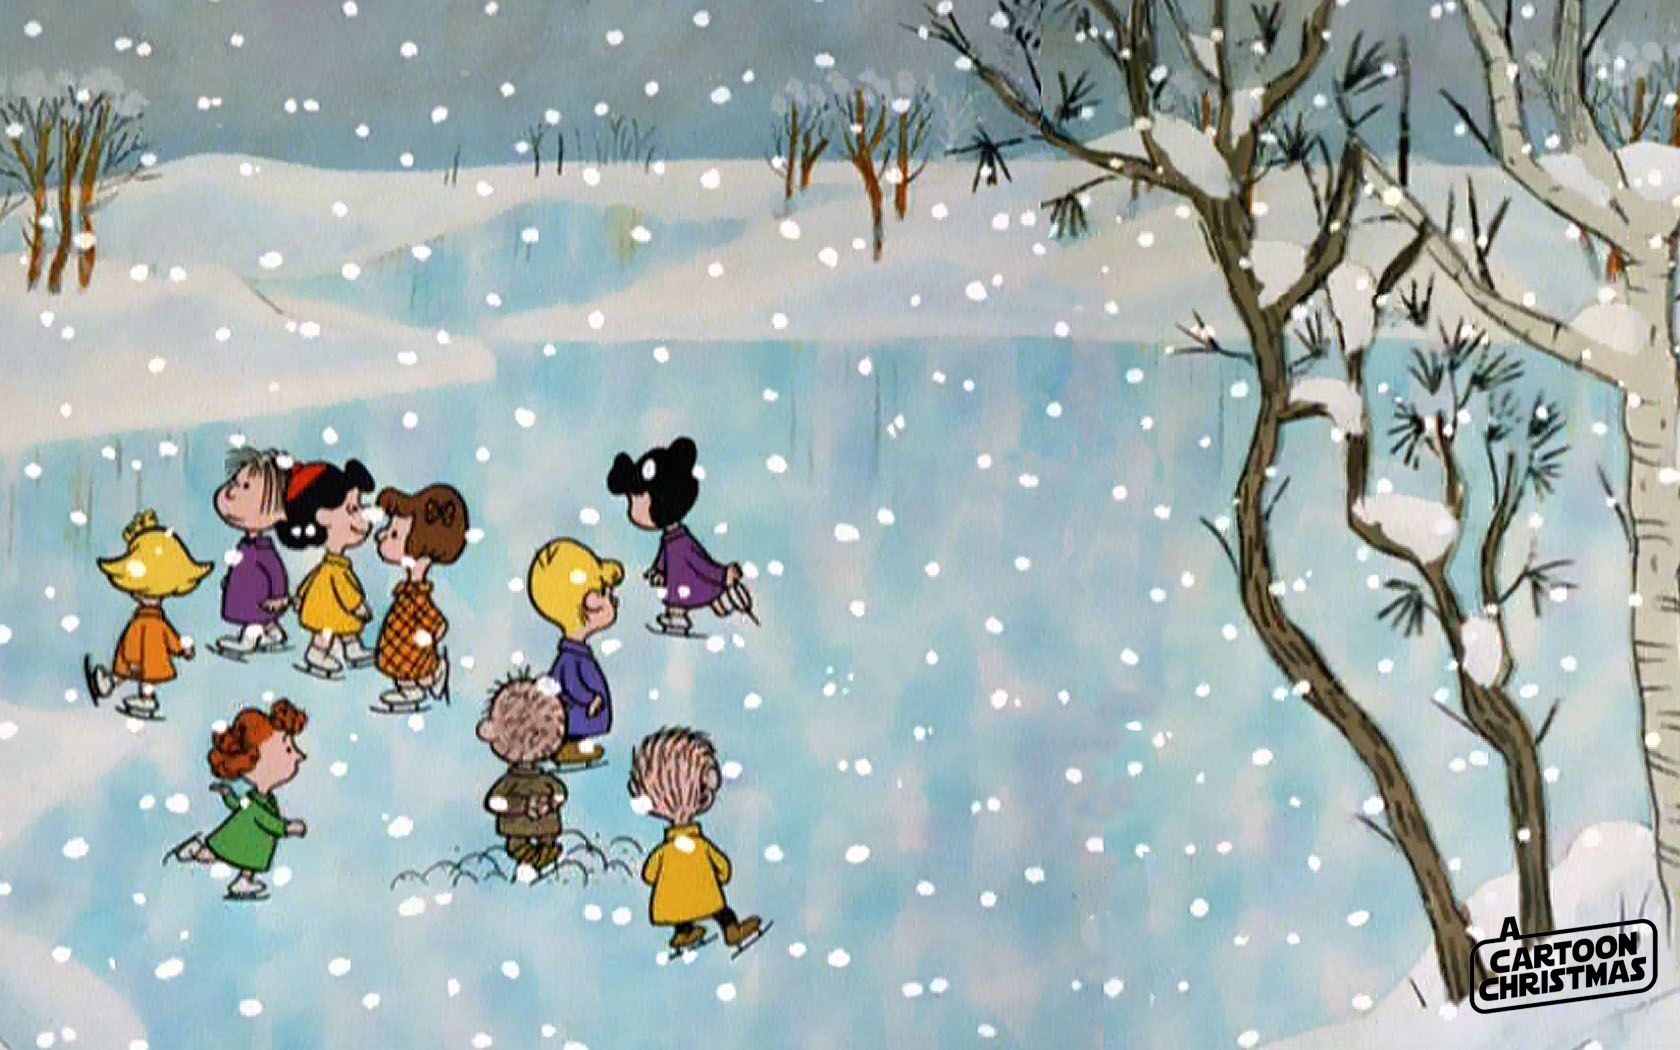 The peanuts gang in a snowy scene - Charlie Brown